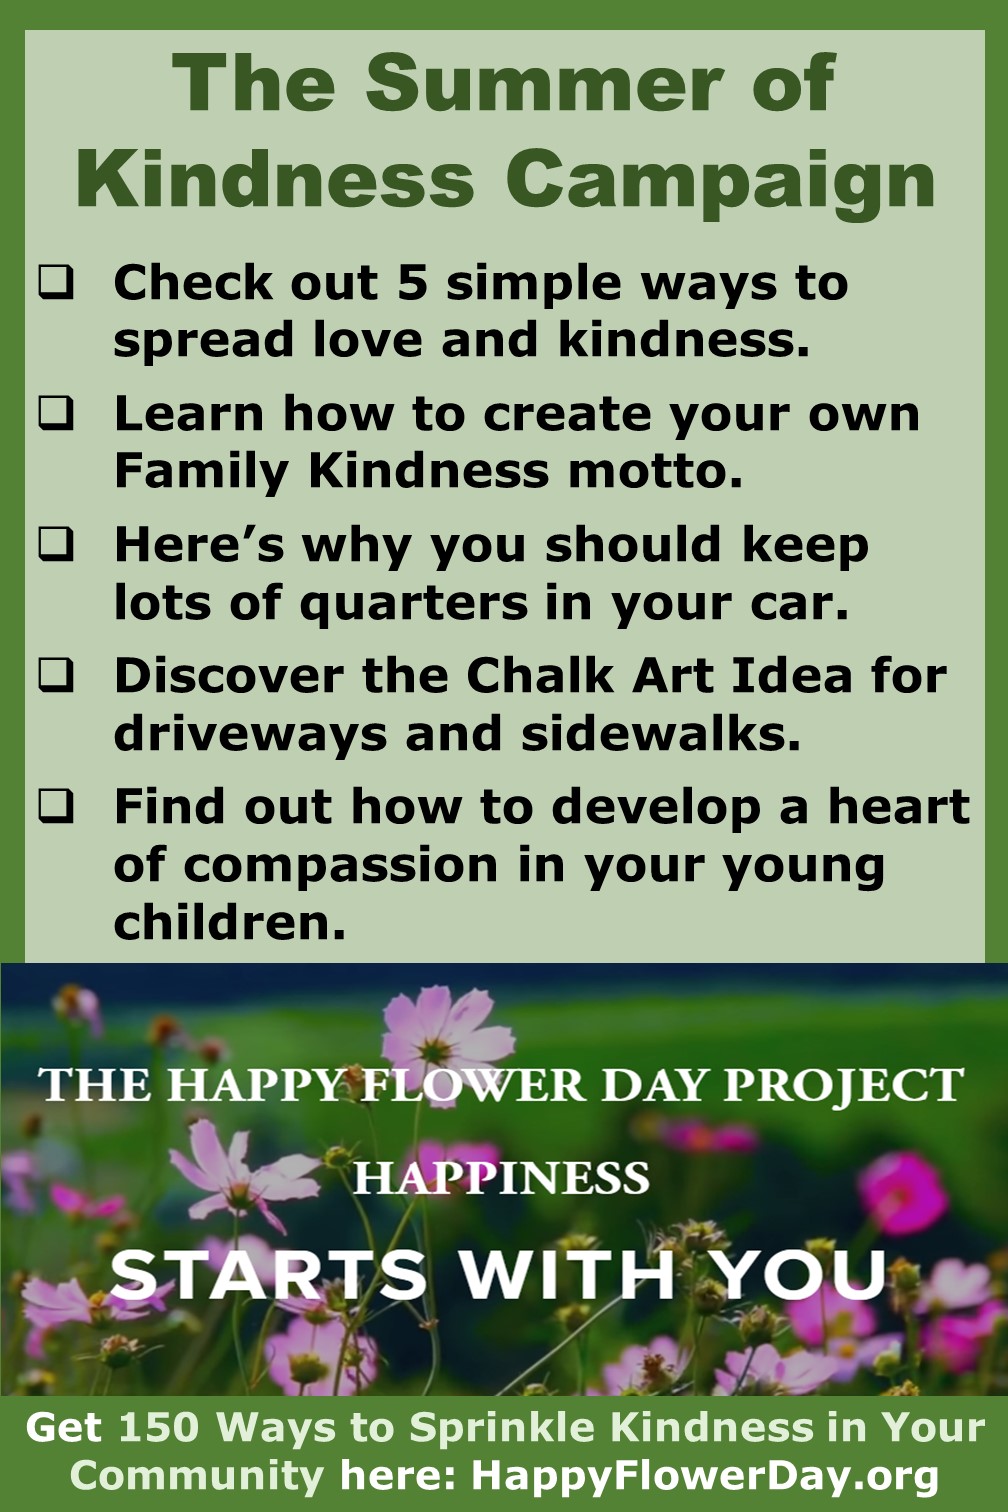 Take part in the Summer of Kindness Campaign.